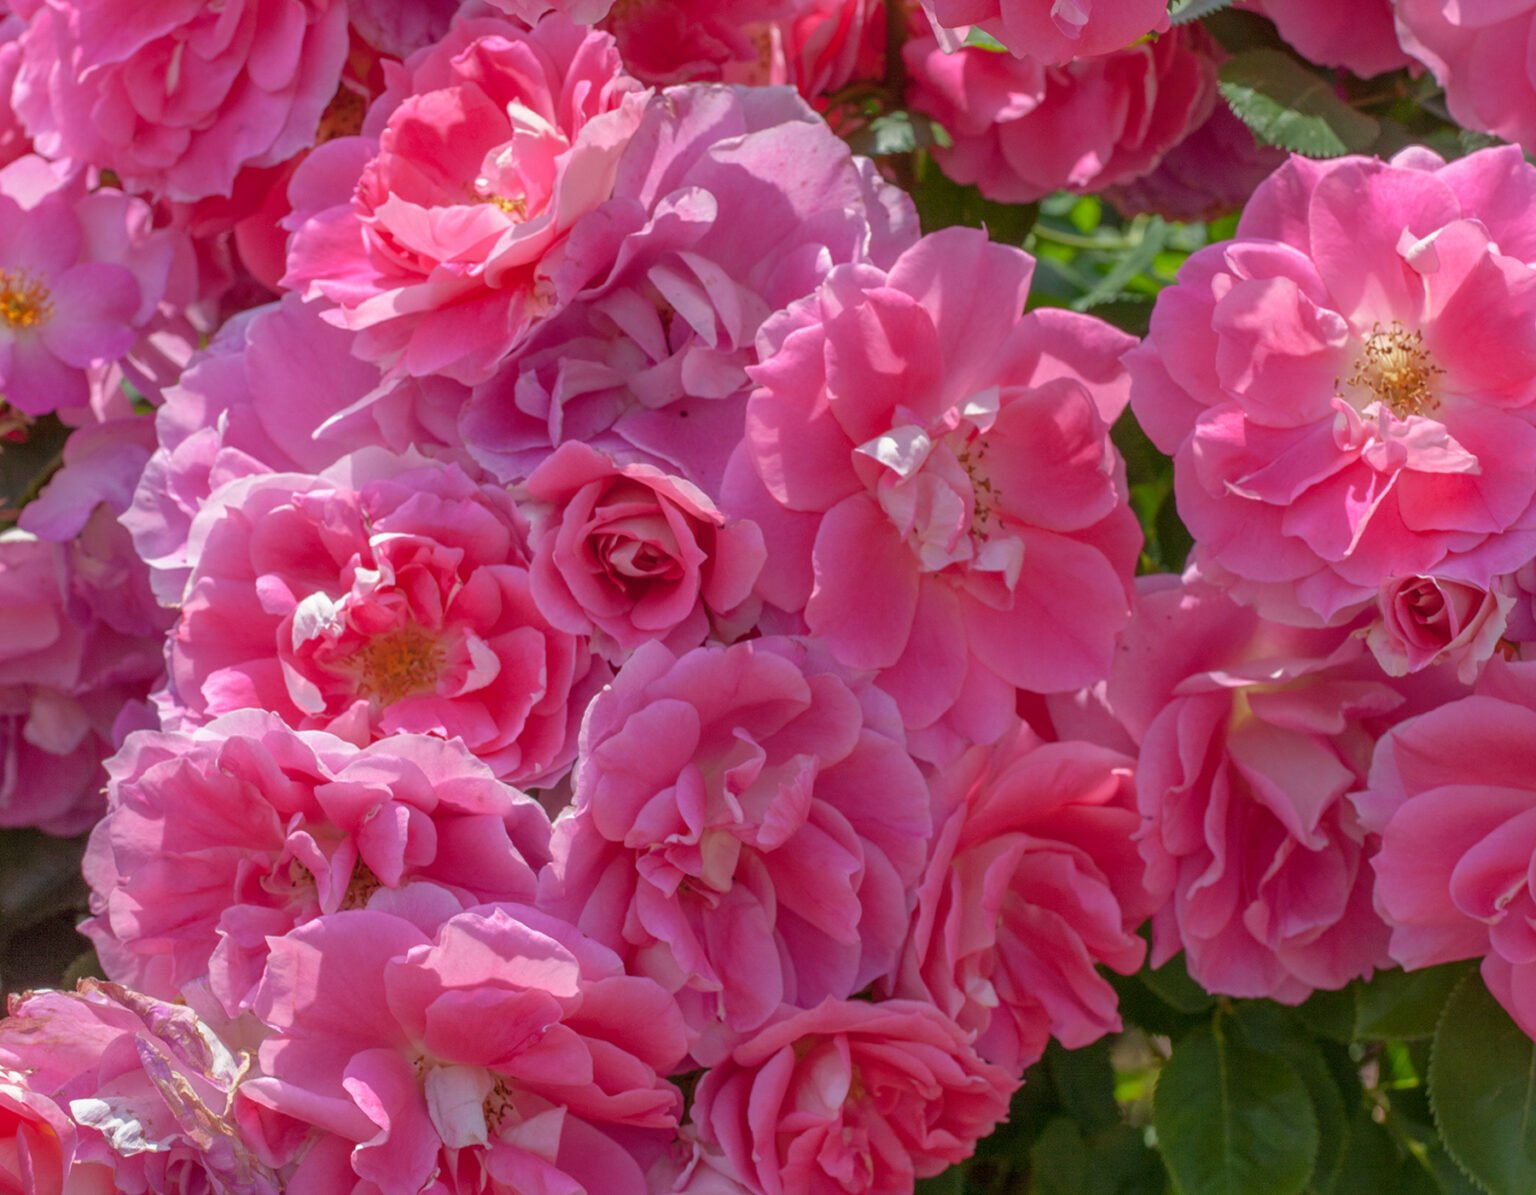 Carefree Wonder - Star® Roses and Plants